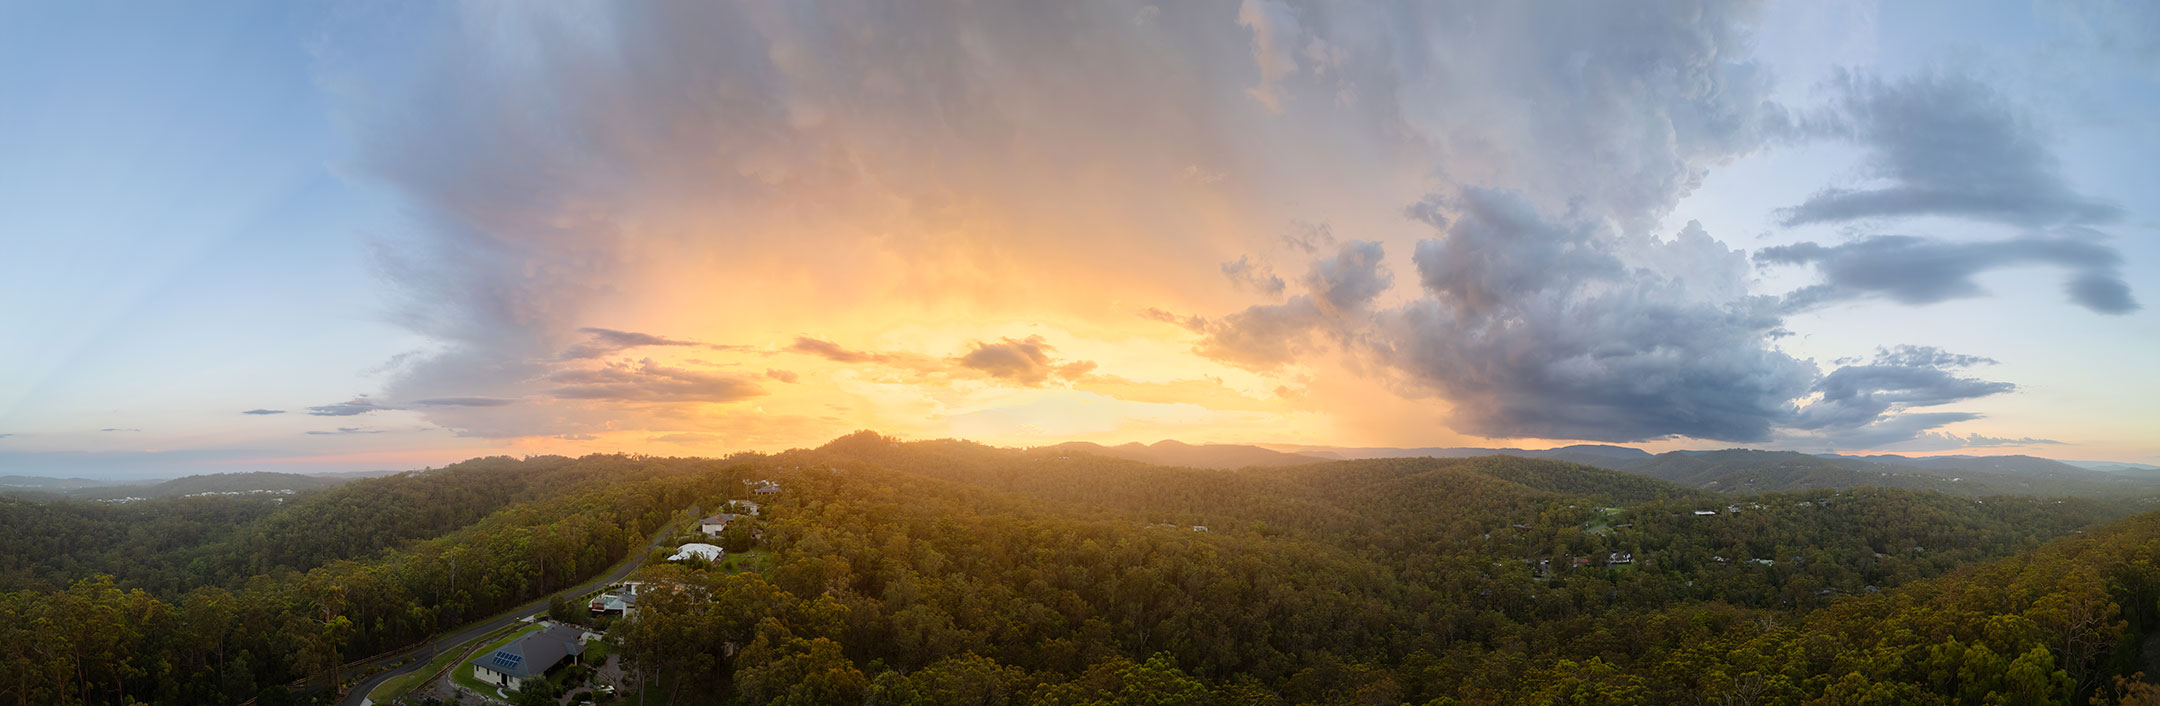 The magnificent, sunset light of a small storm over the Gold Coast Hinterland, Australia